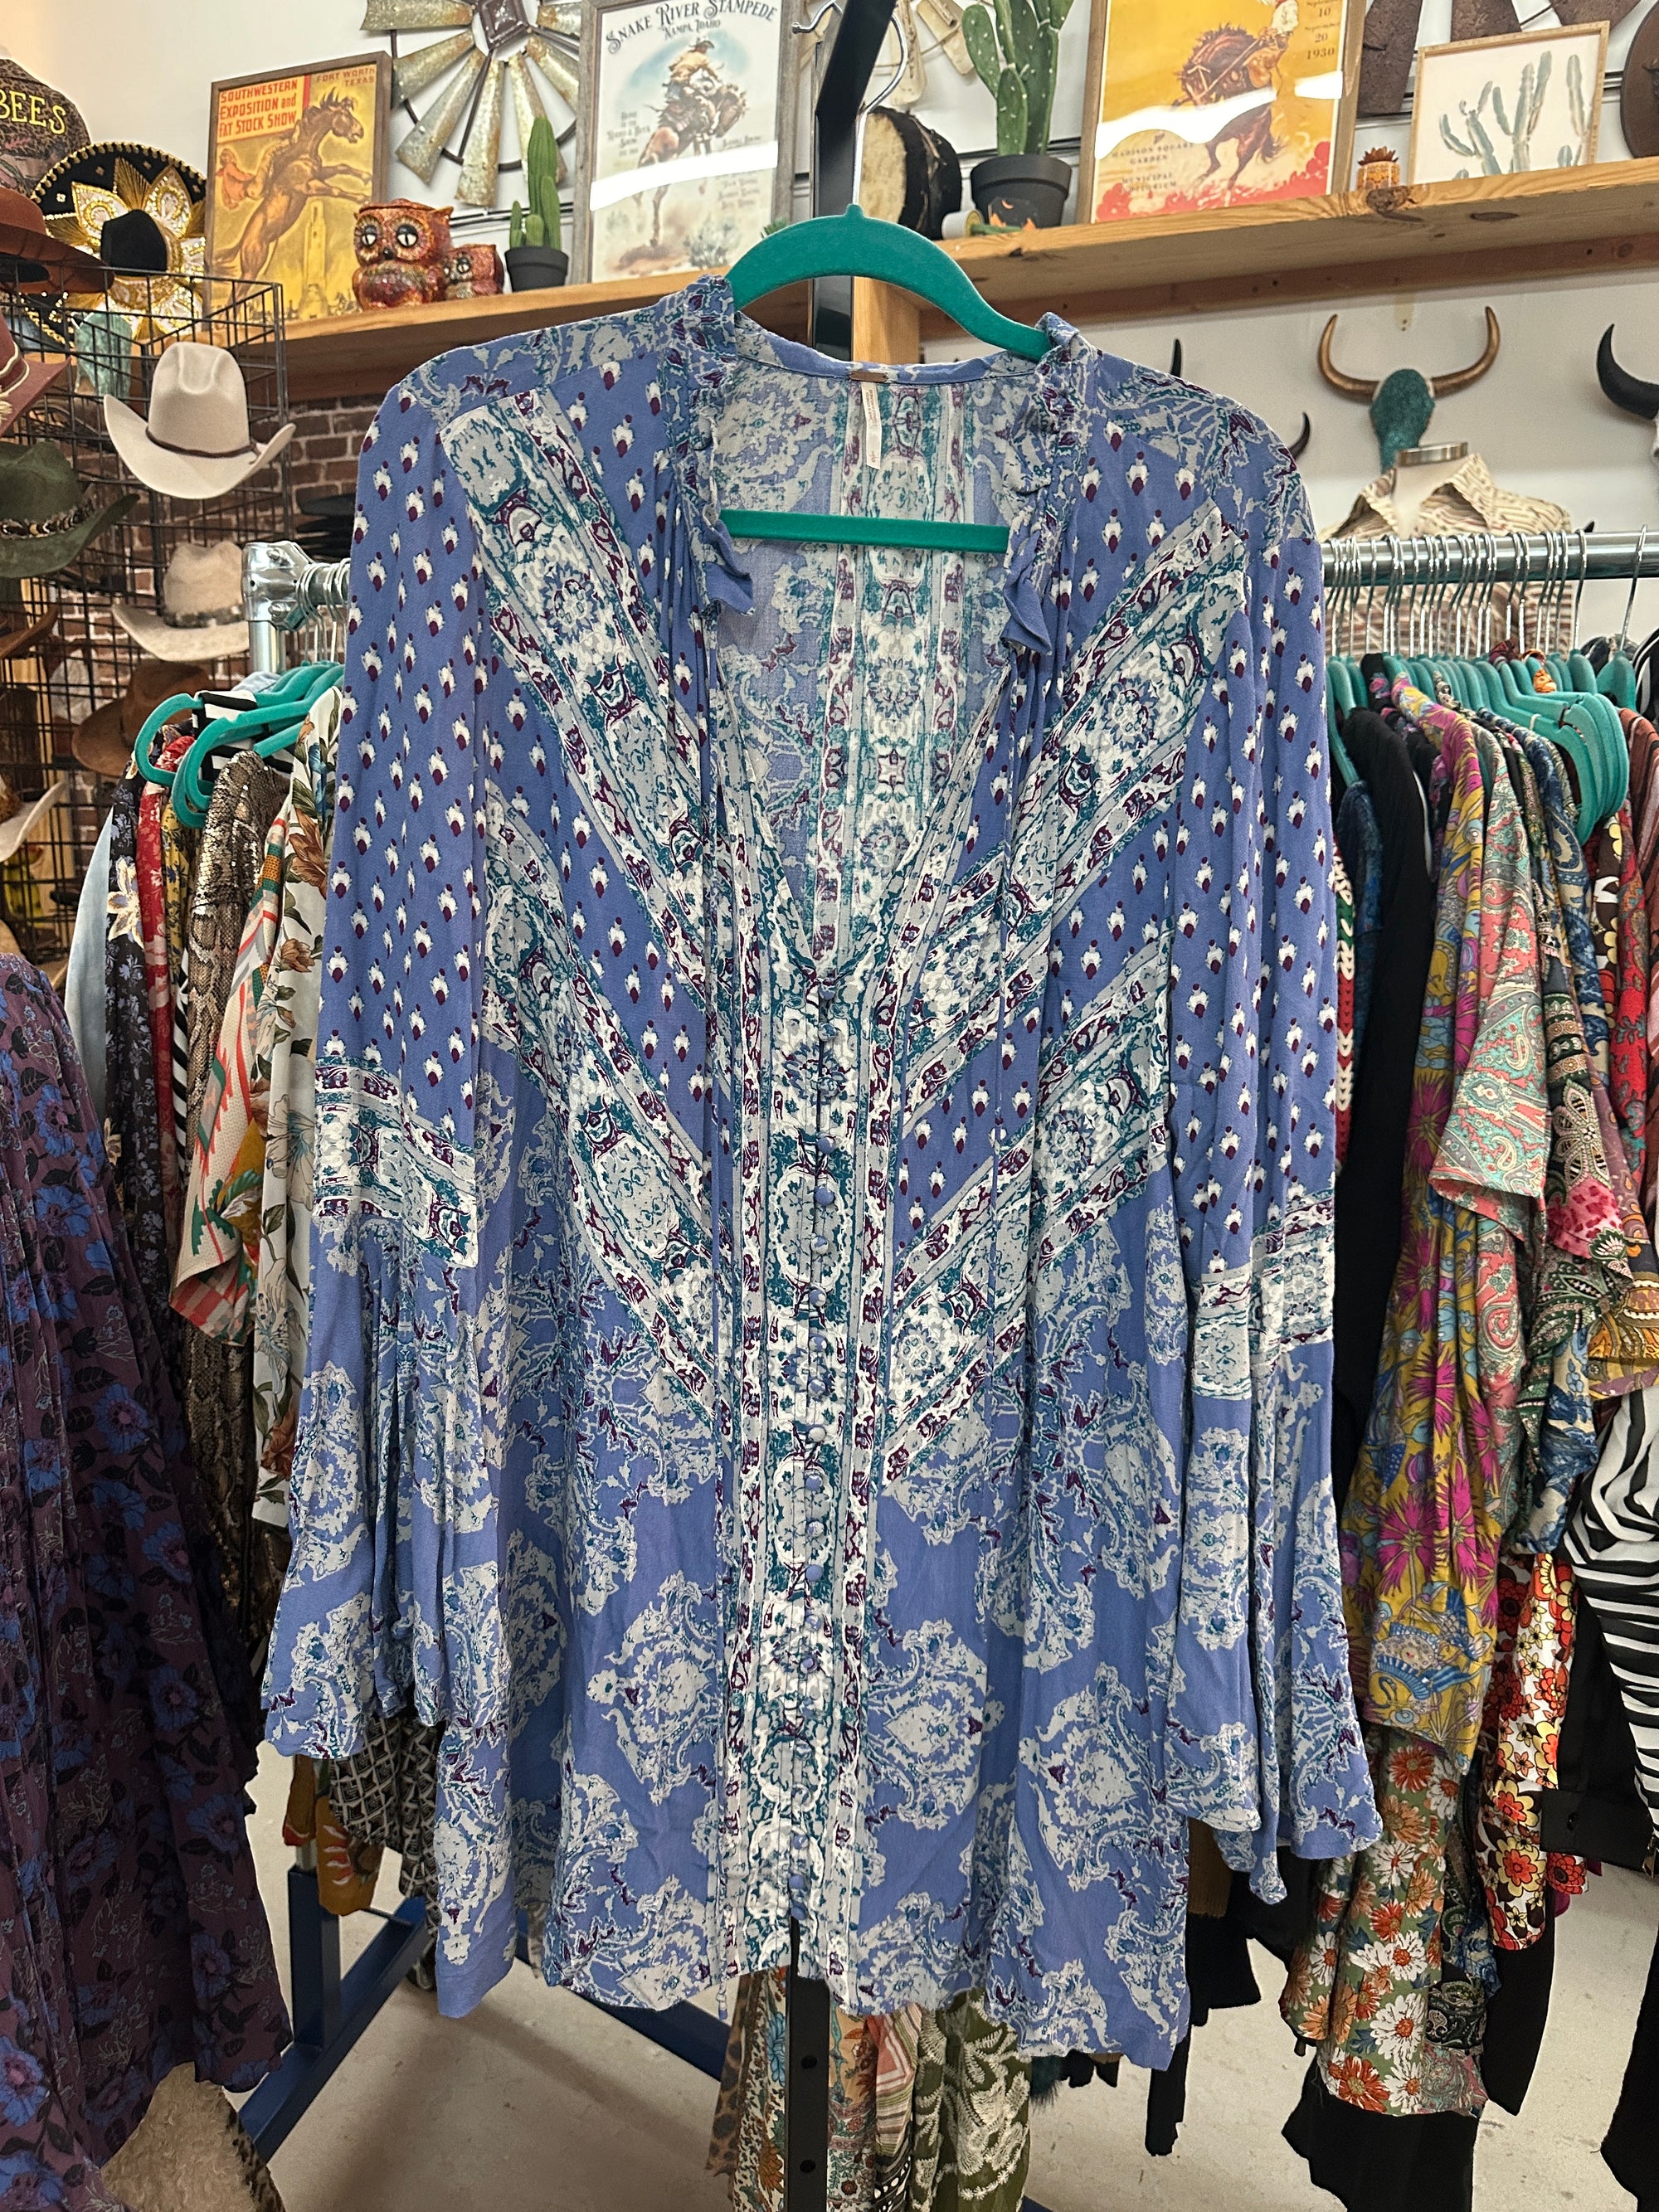 Free People Magic Mystery Tunic Dress &/or Top - Denim Blue/Burgundy Mix - Size Large